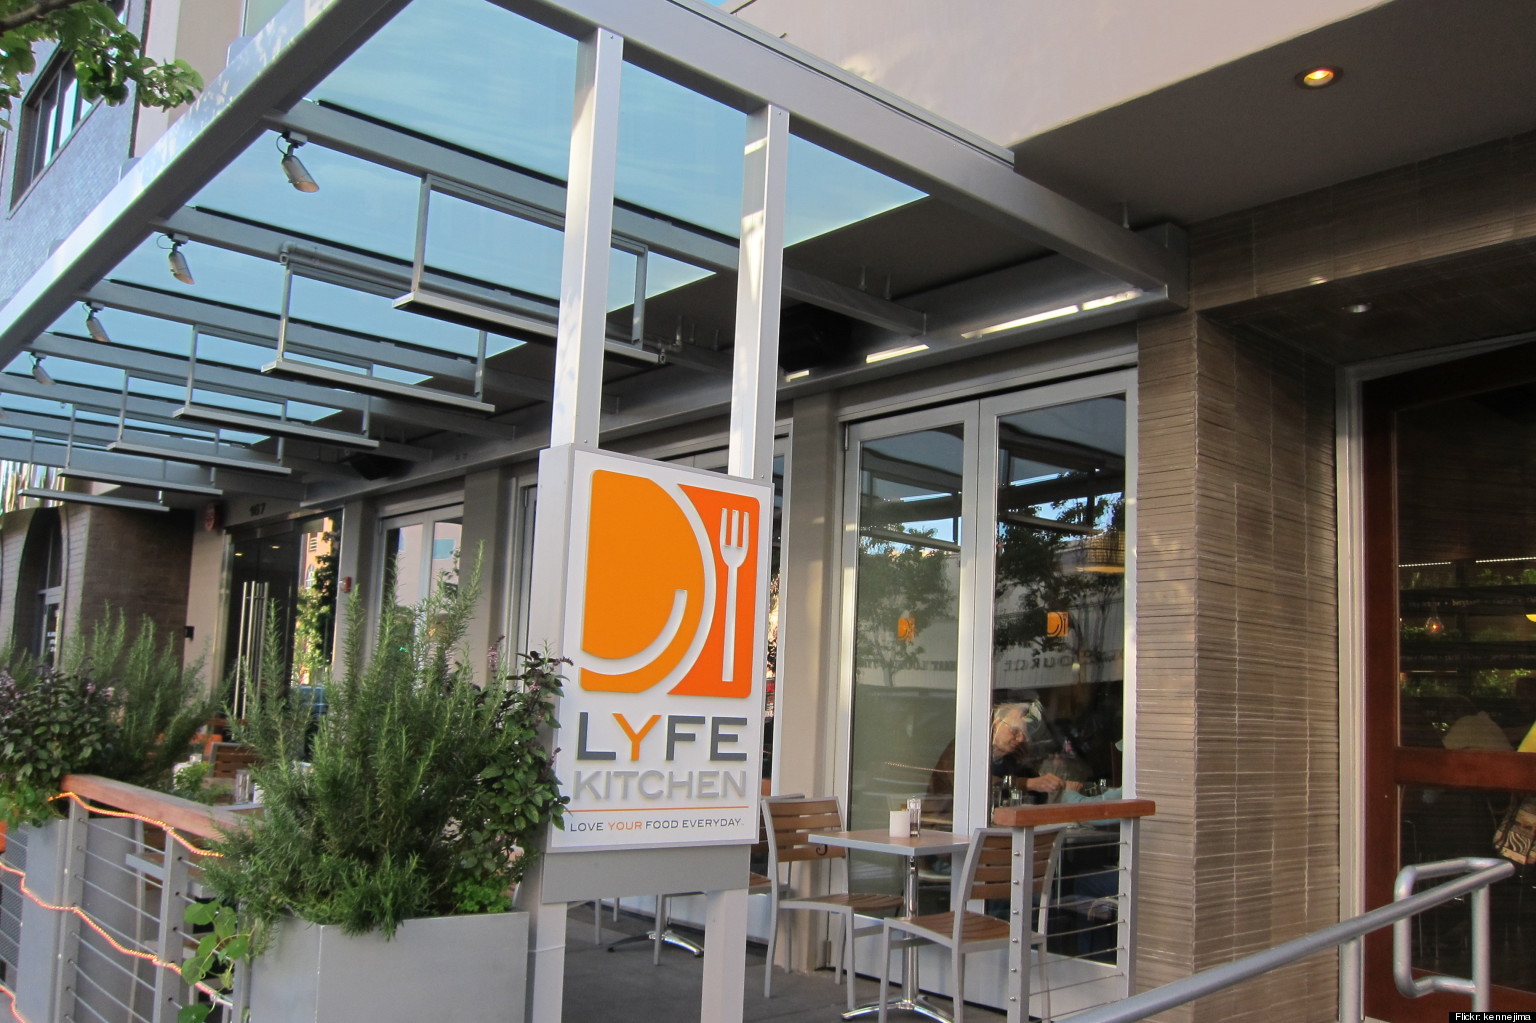 Lyfe Kitchen Health Food Restaurant Founded By Former McDonalds